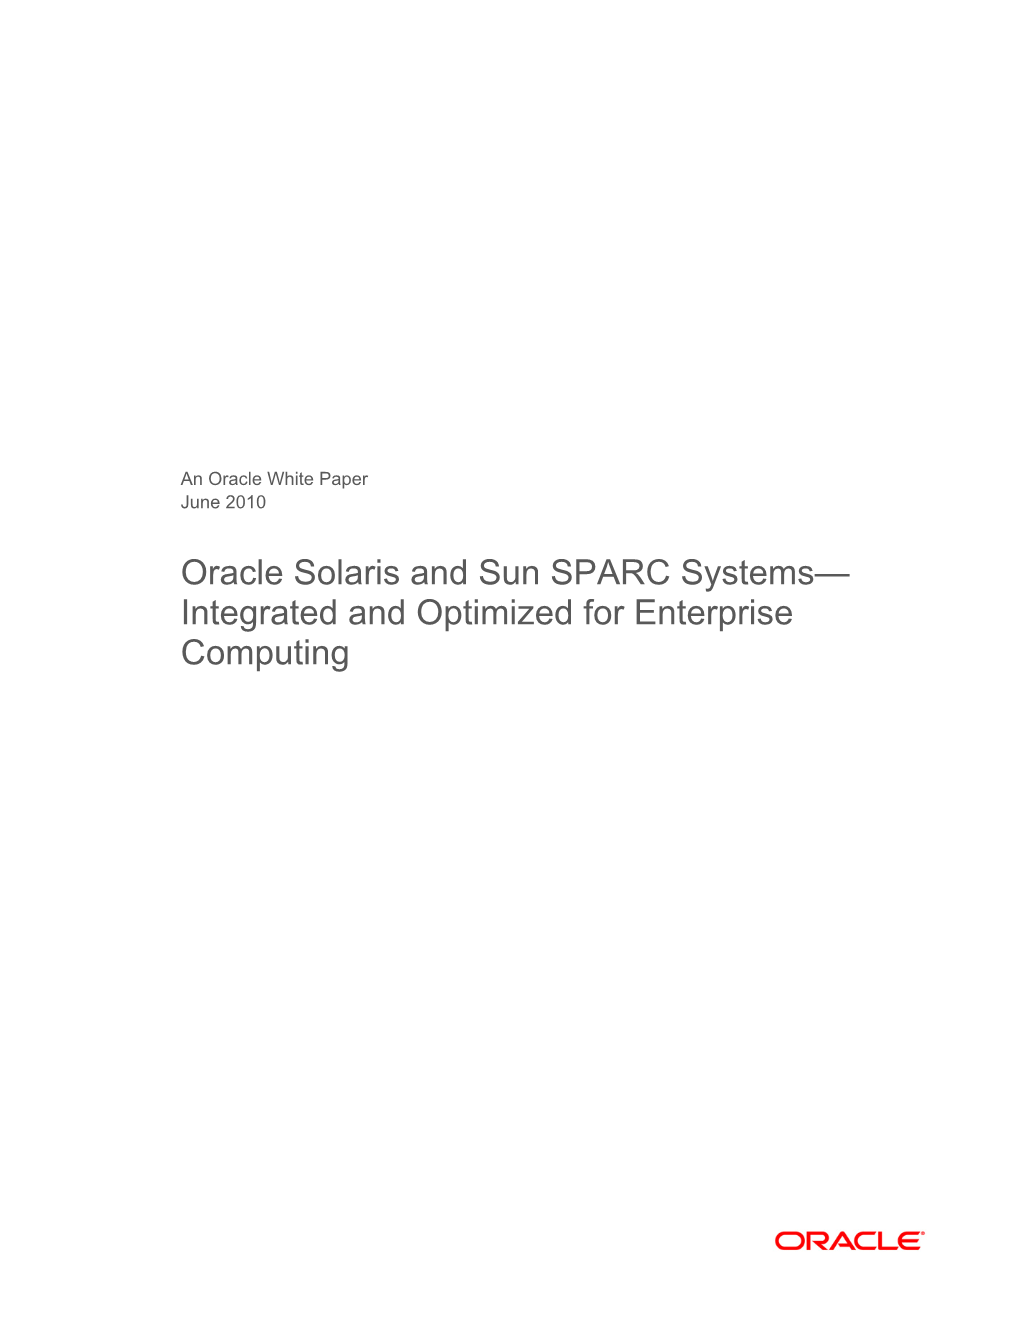 Oracle Solaris and Sun SPARC Systems—Integrated and Optimized for Enterprise Computing